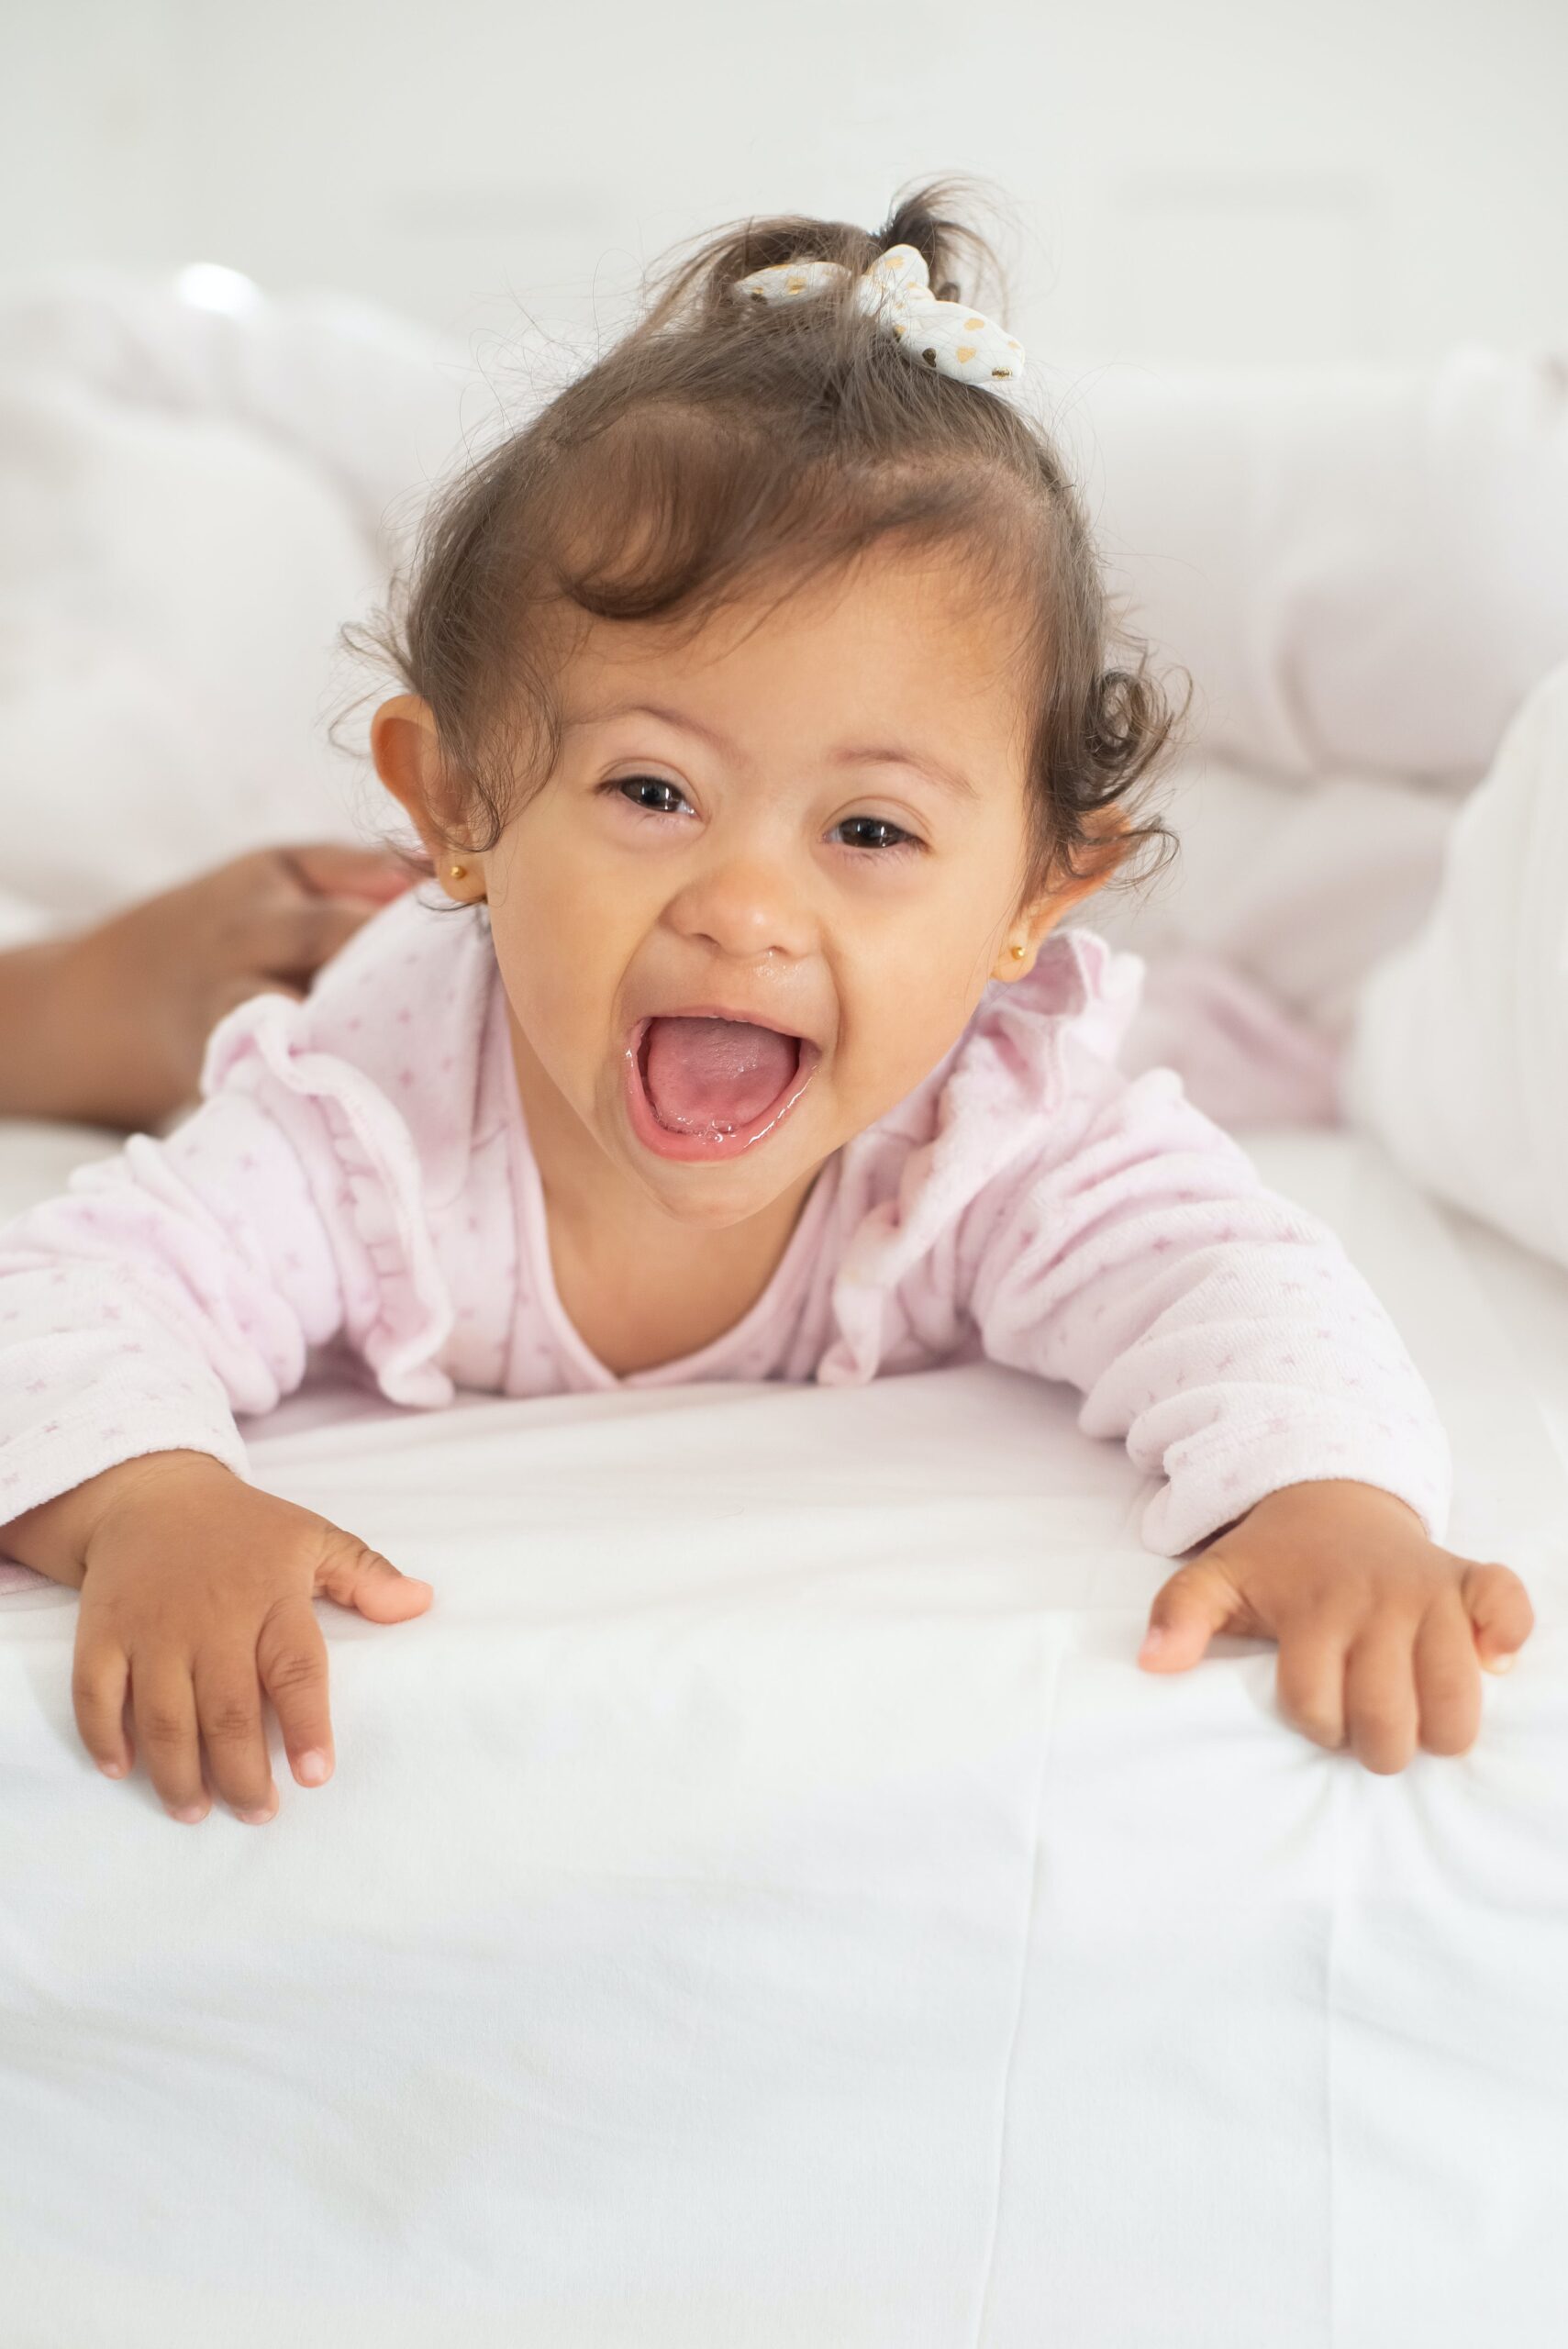 Joyful little girl with special needs actively crawling on a bed, highlighting the personalized, adaptive, and supportive care provided by Lifetime of Love Nannies